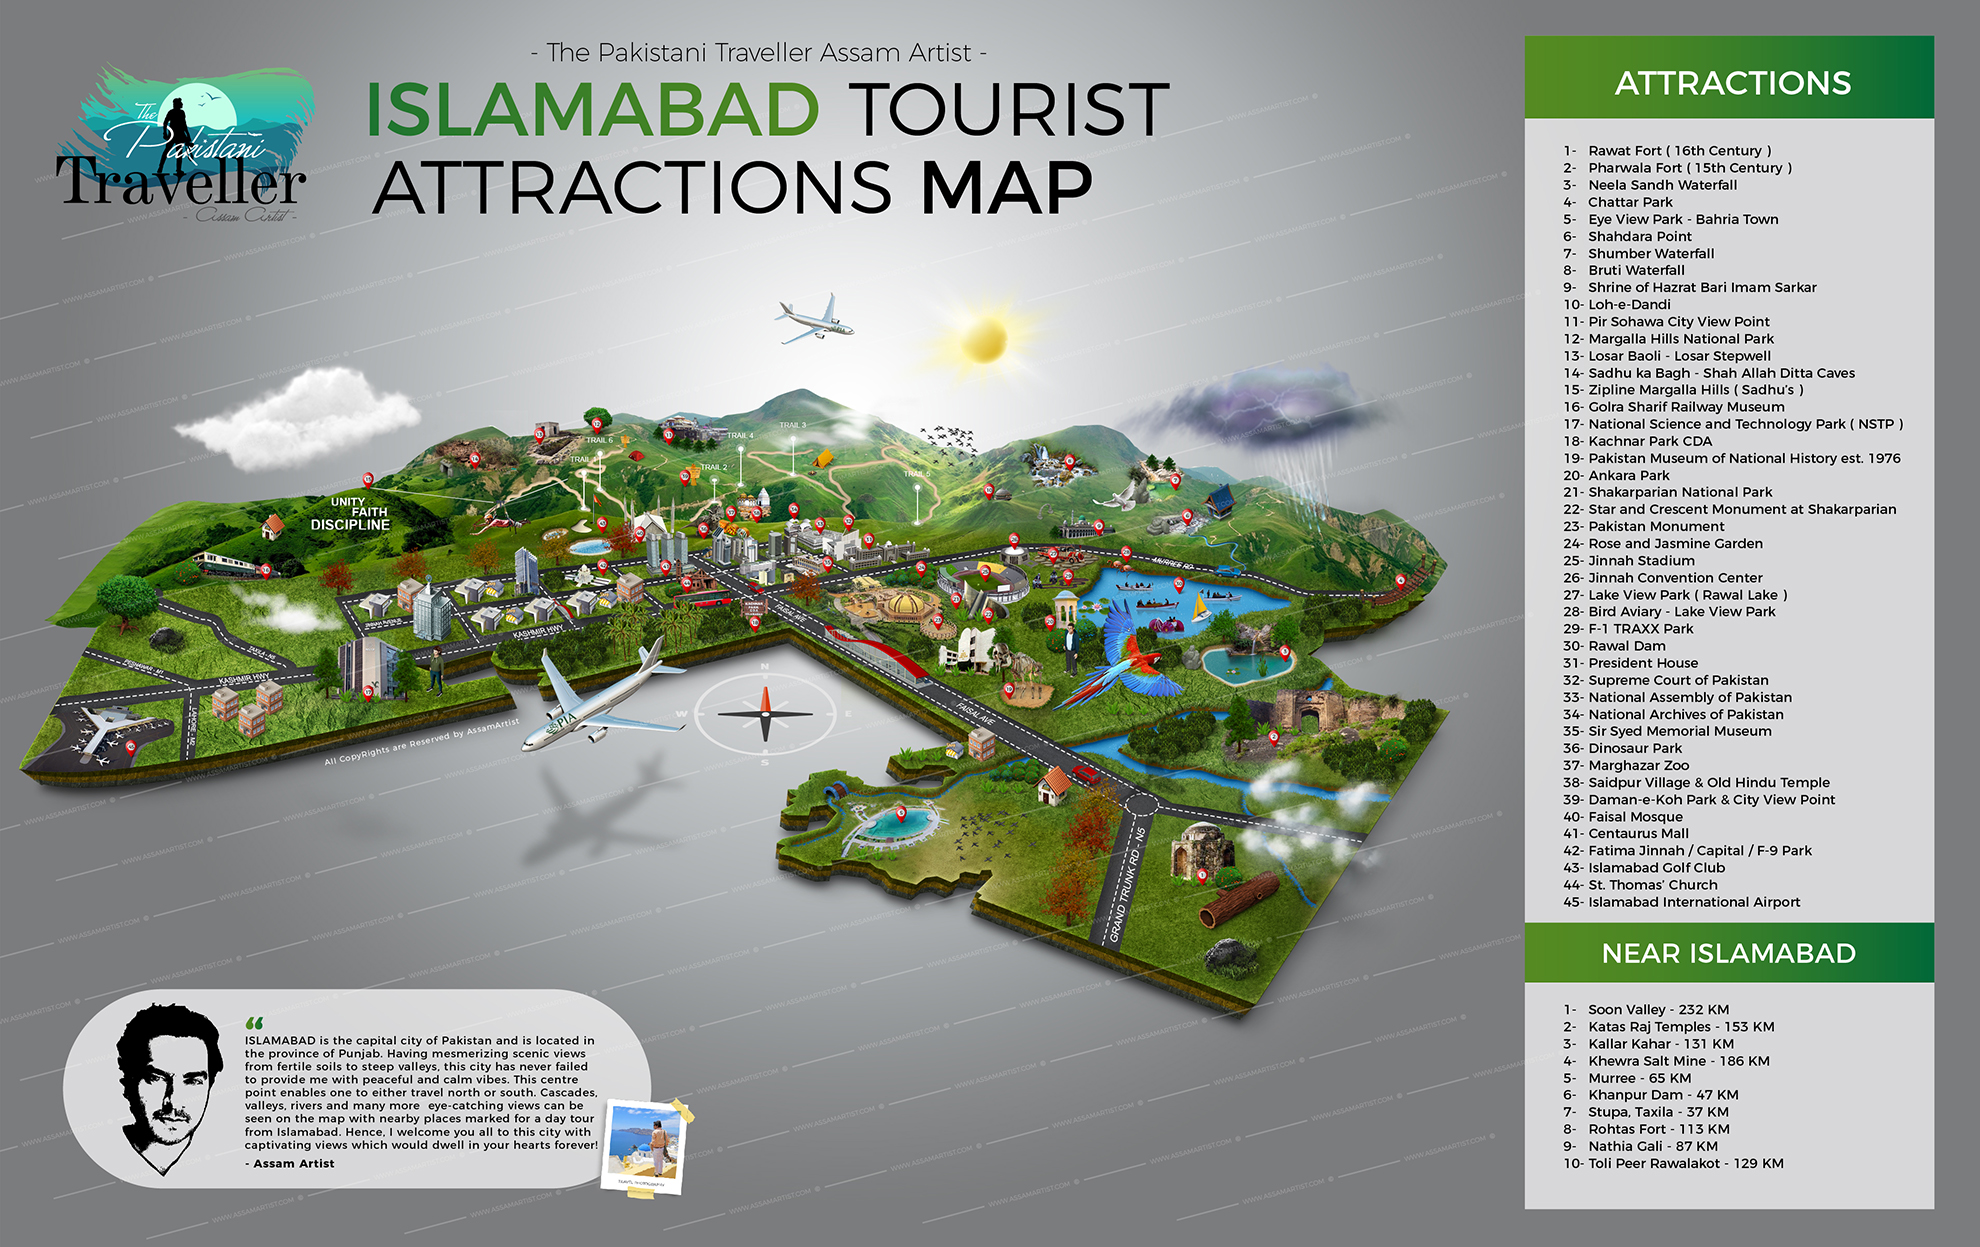 Islamabad Tourist Attractions Map feature image